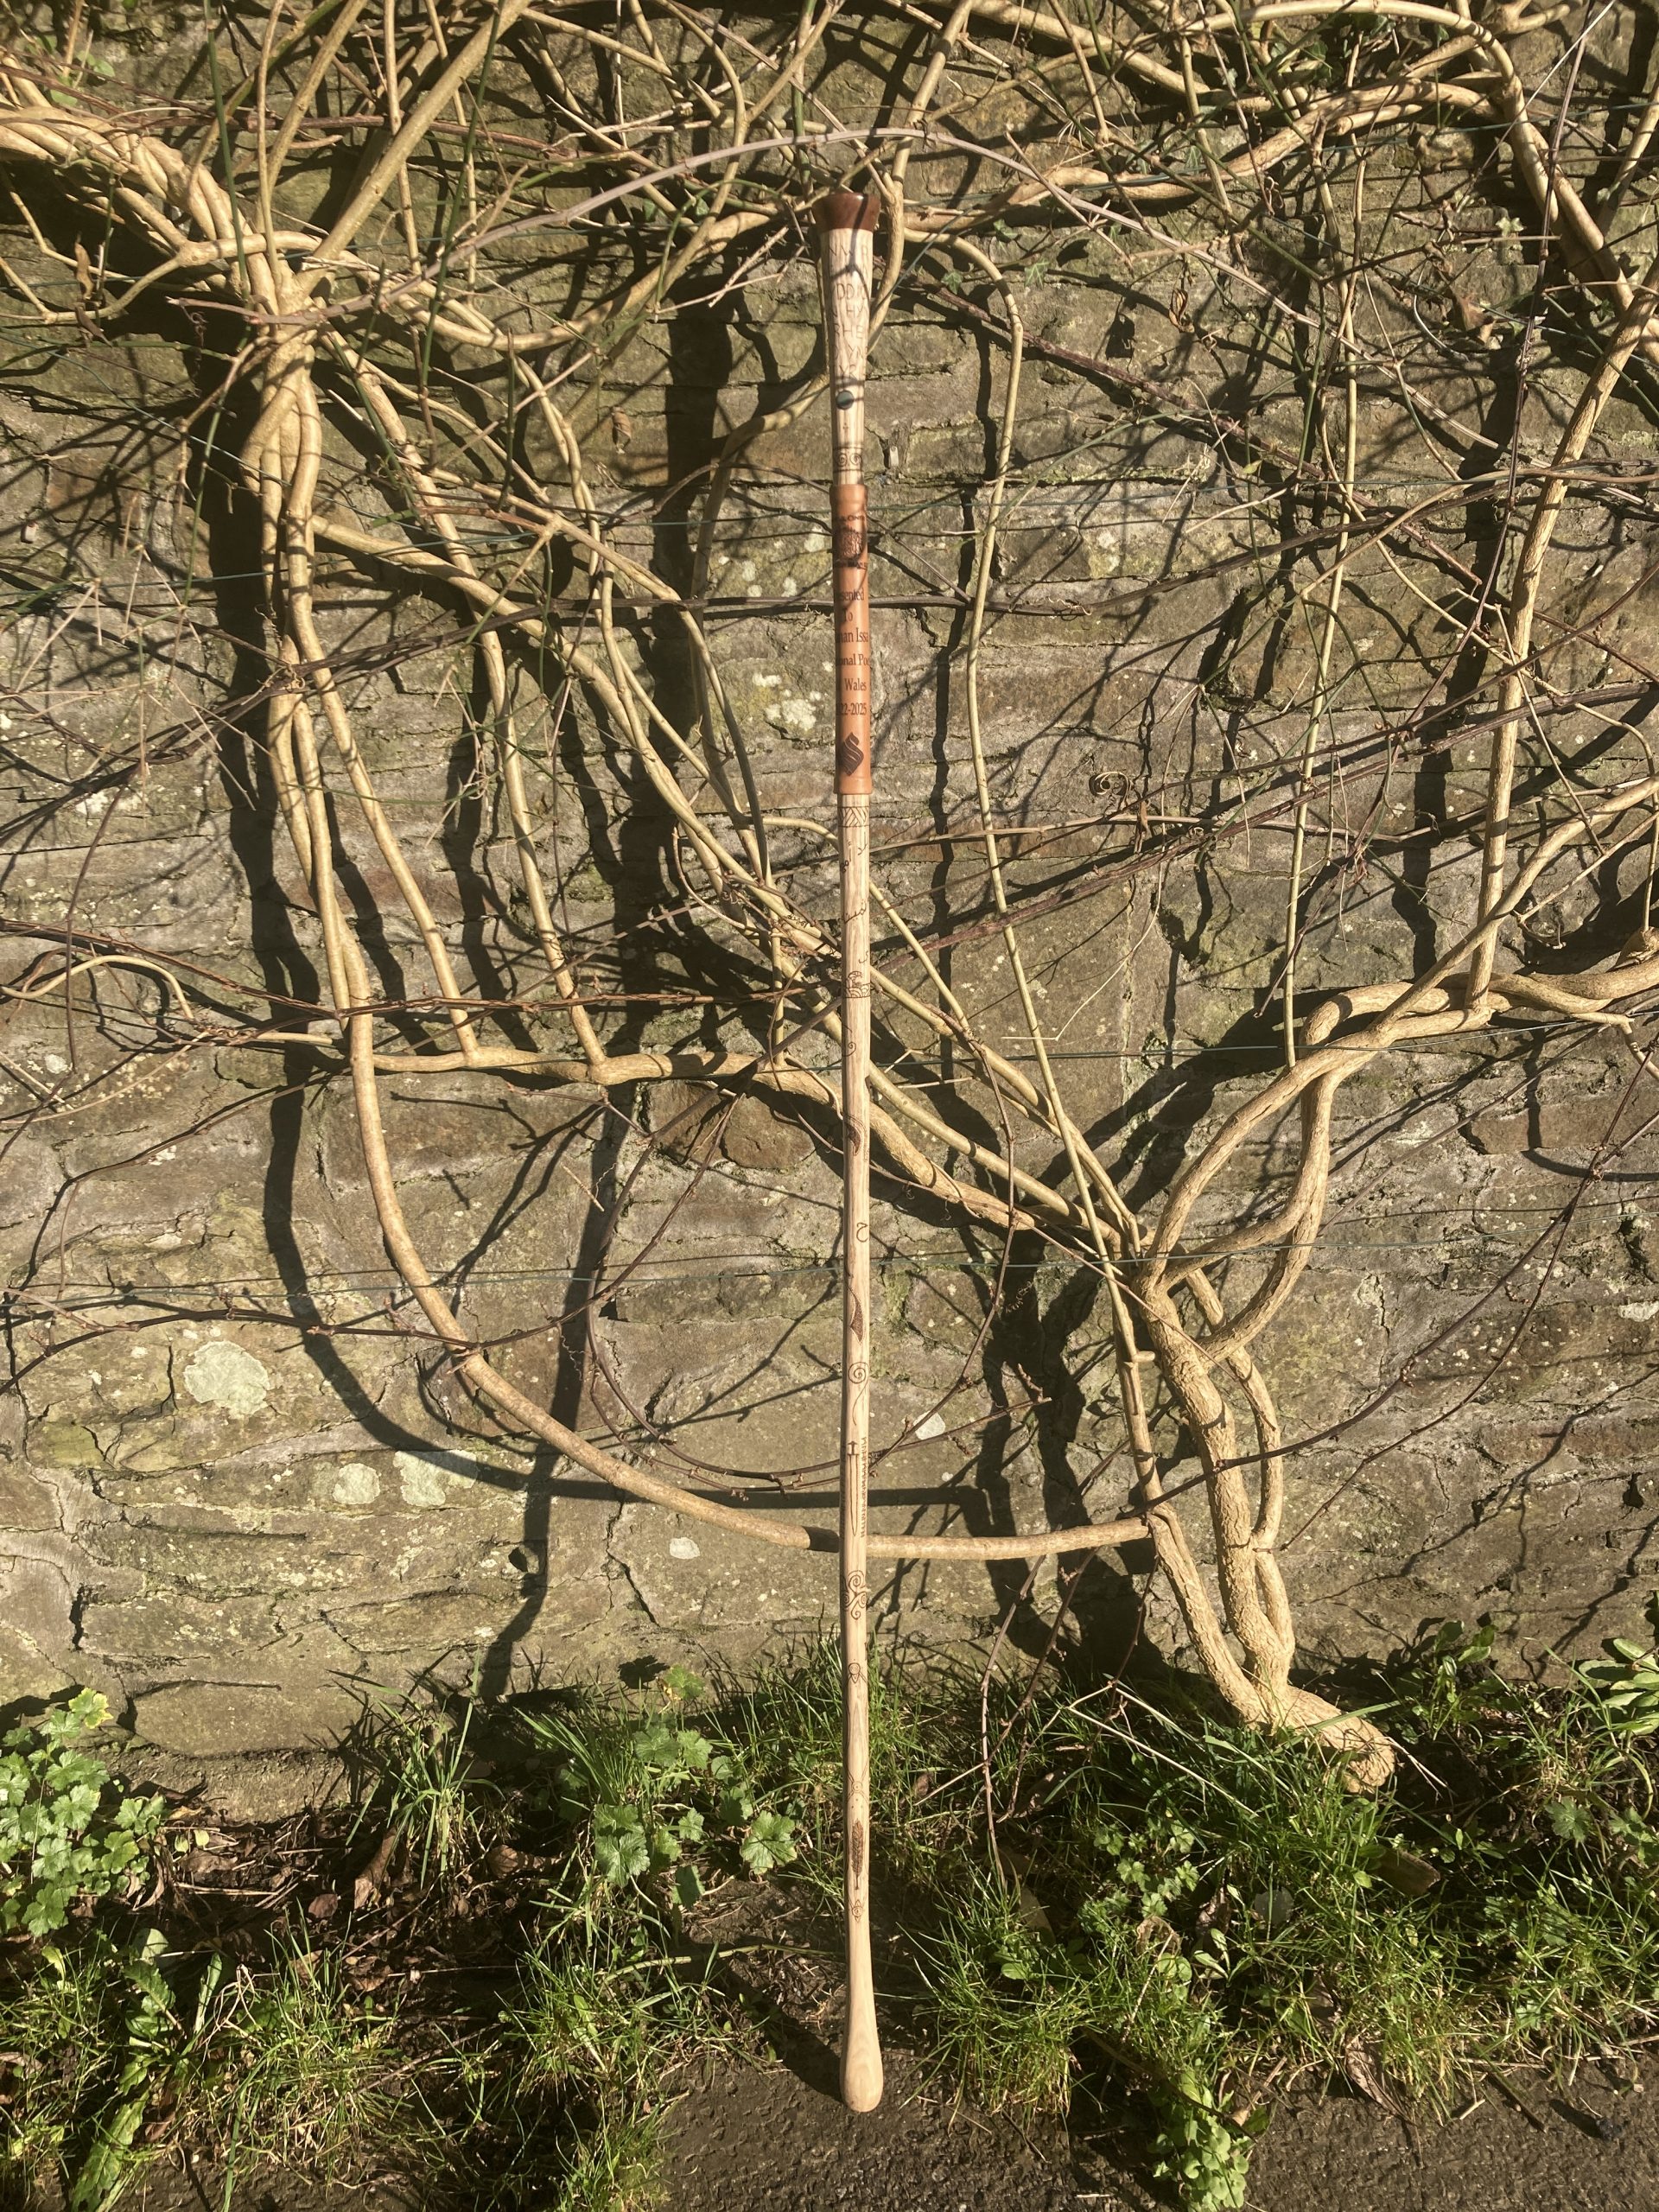 A carved and decorated staff leans against a bare tree climbing a stone wall.